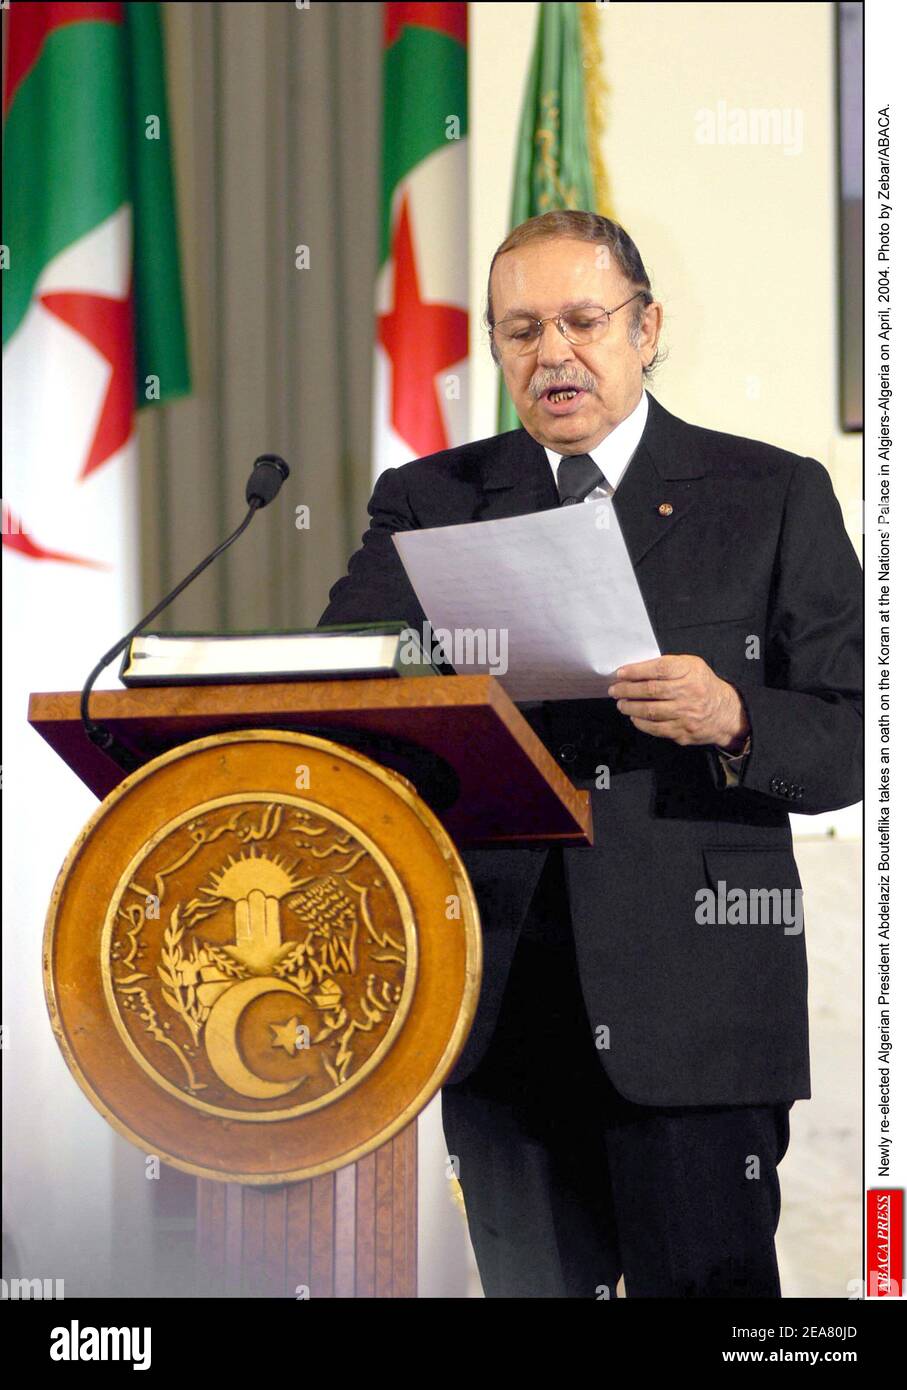 Newly re-elected Algerian President Abdelaziz Bouteflika takes an oath on the Koran at the Nations' Palace in Algiers-Algeria on April, 2004. Photo by Zebar/ABACA. Stock Photo